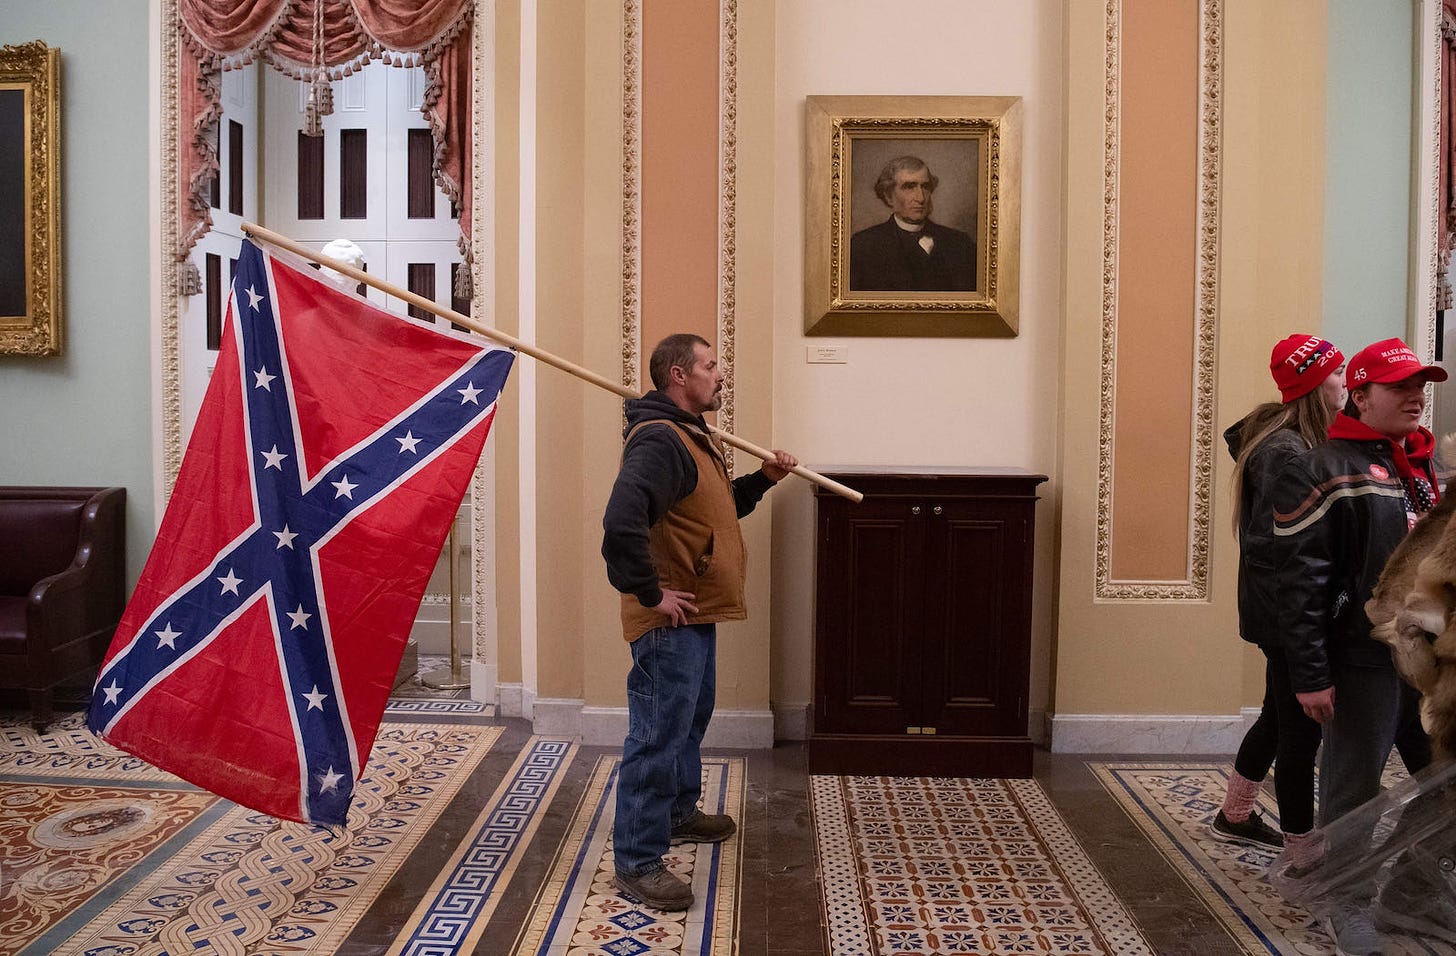 A Trump supporter carrying a Confederate flag, 2021